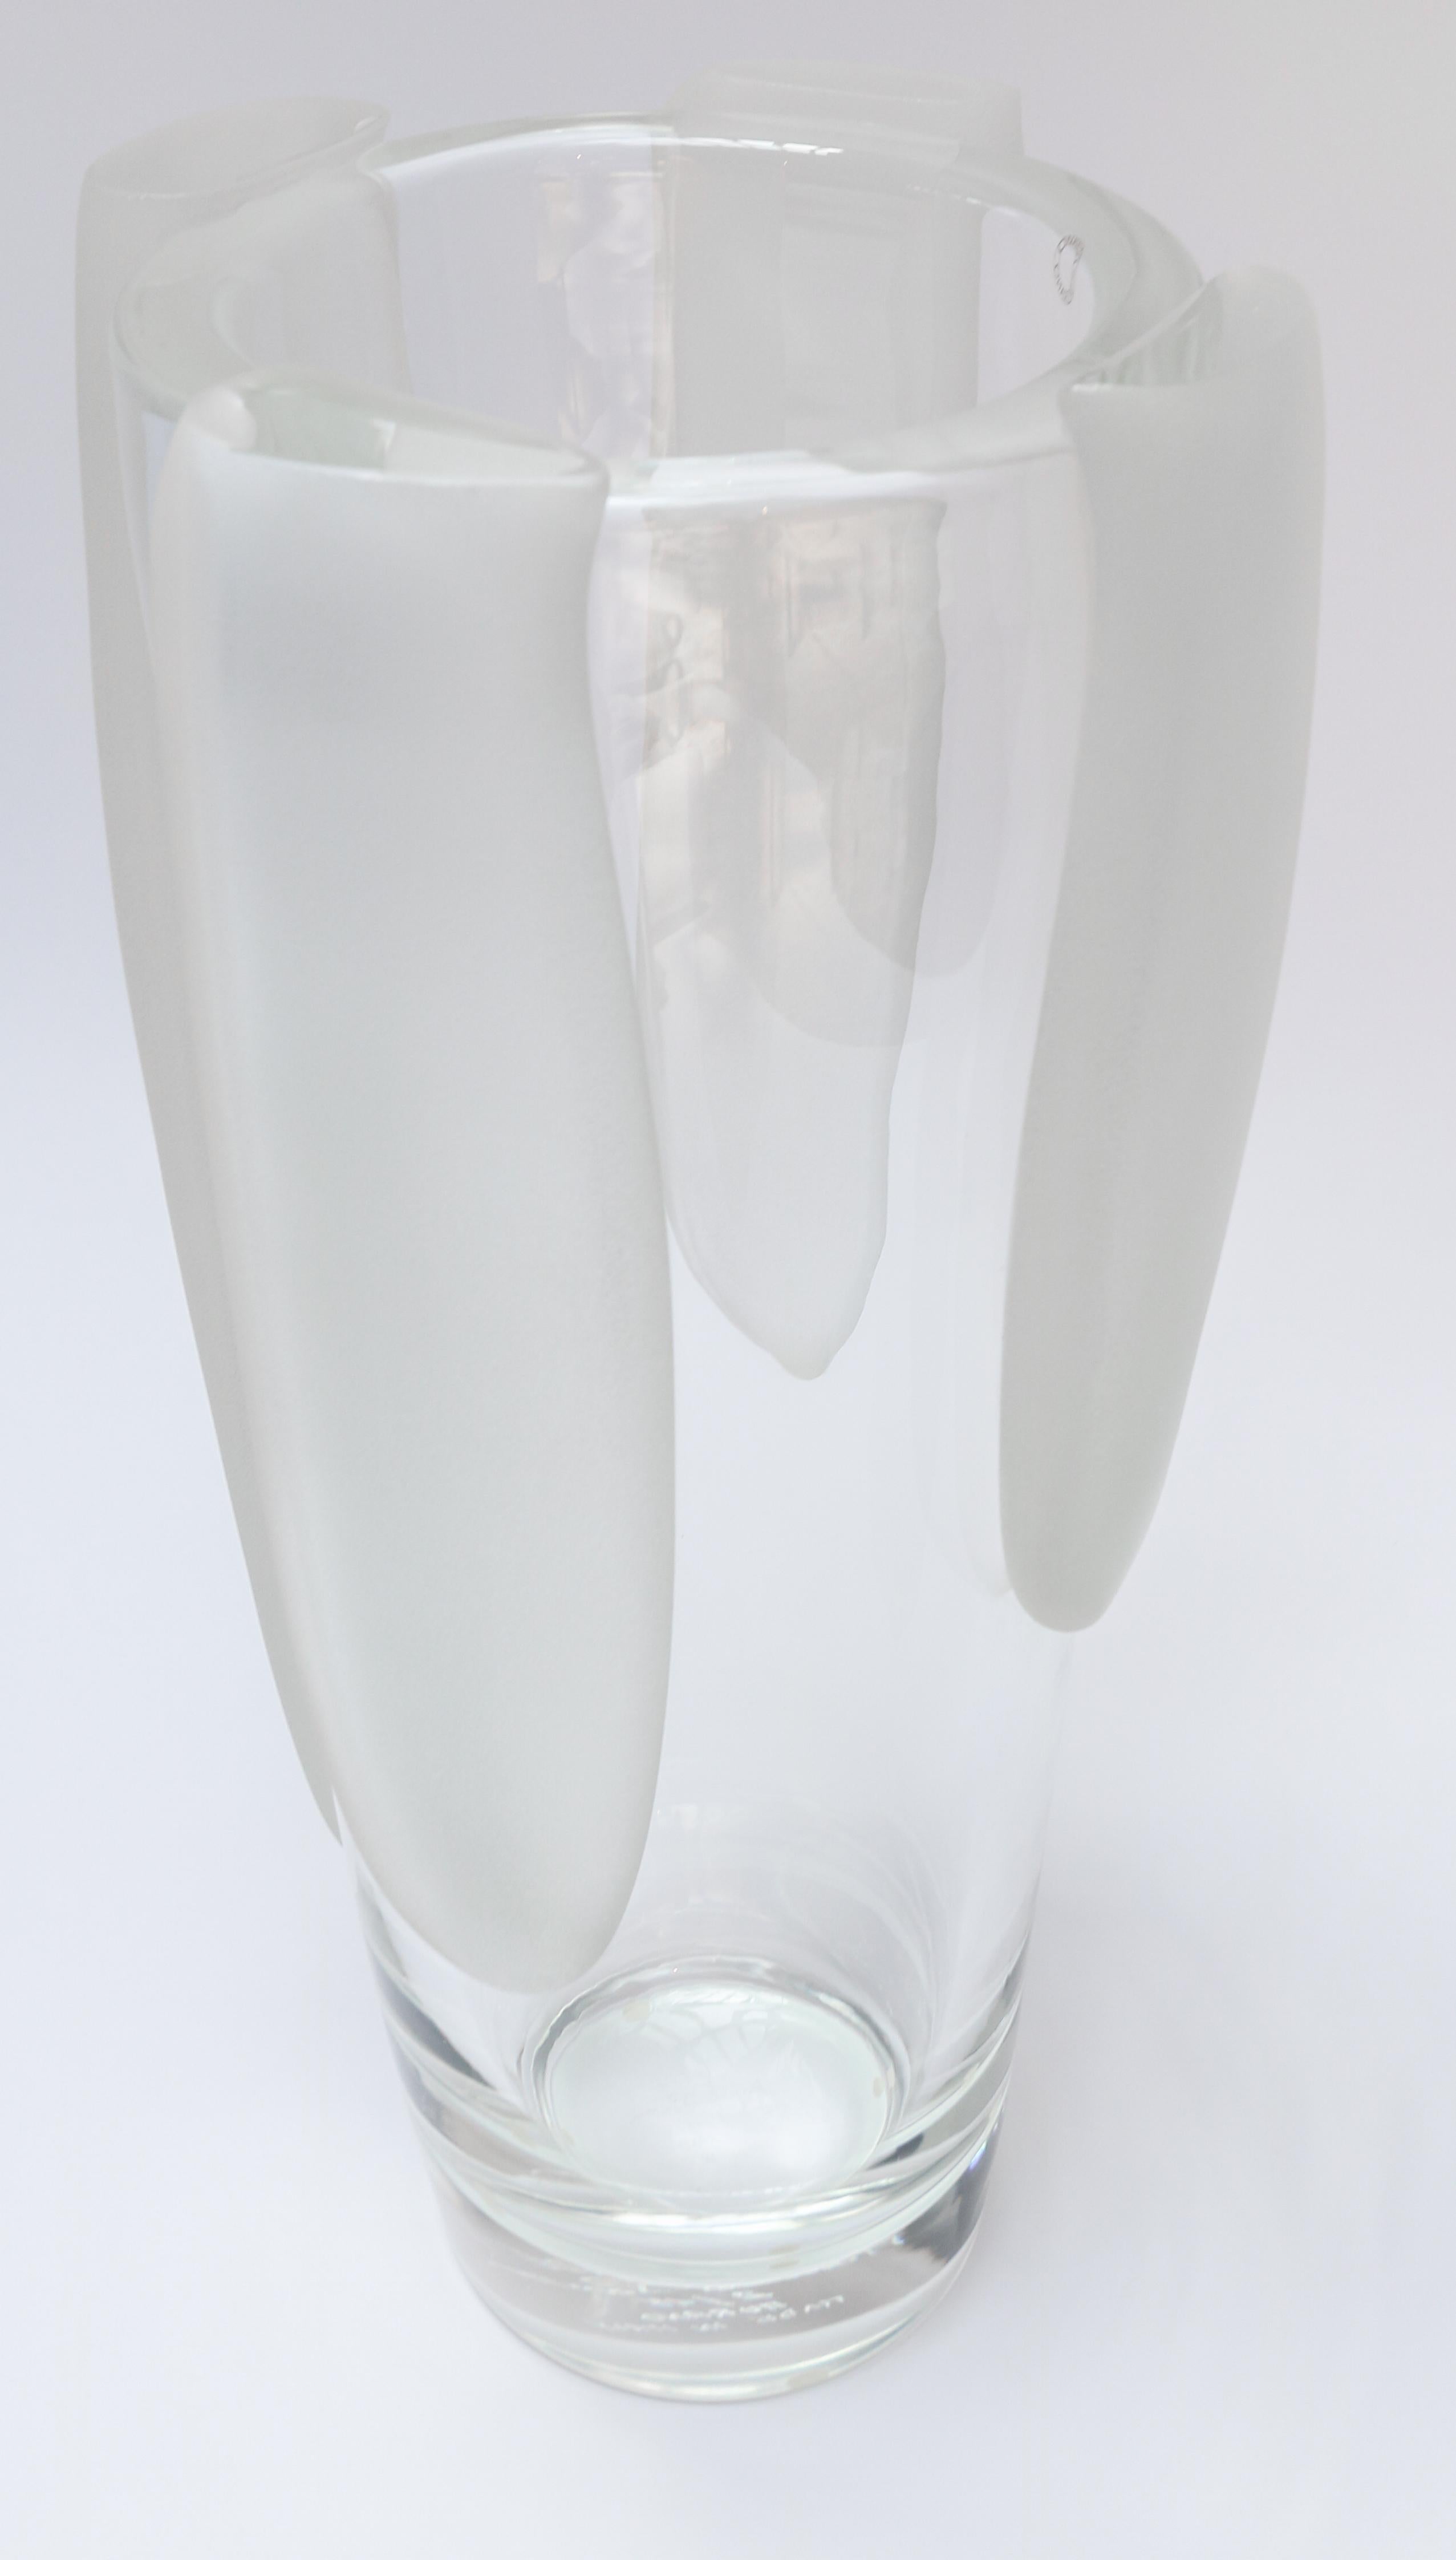 Sparta a murano glass vase. Transparent glass with sanded white finish features.